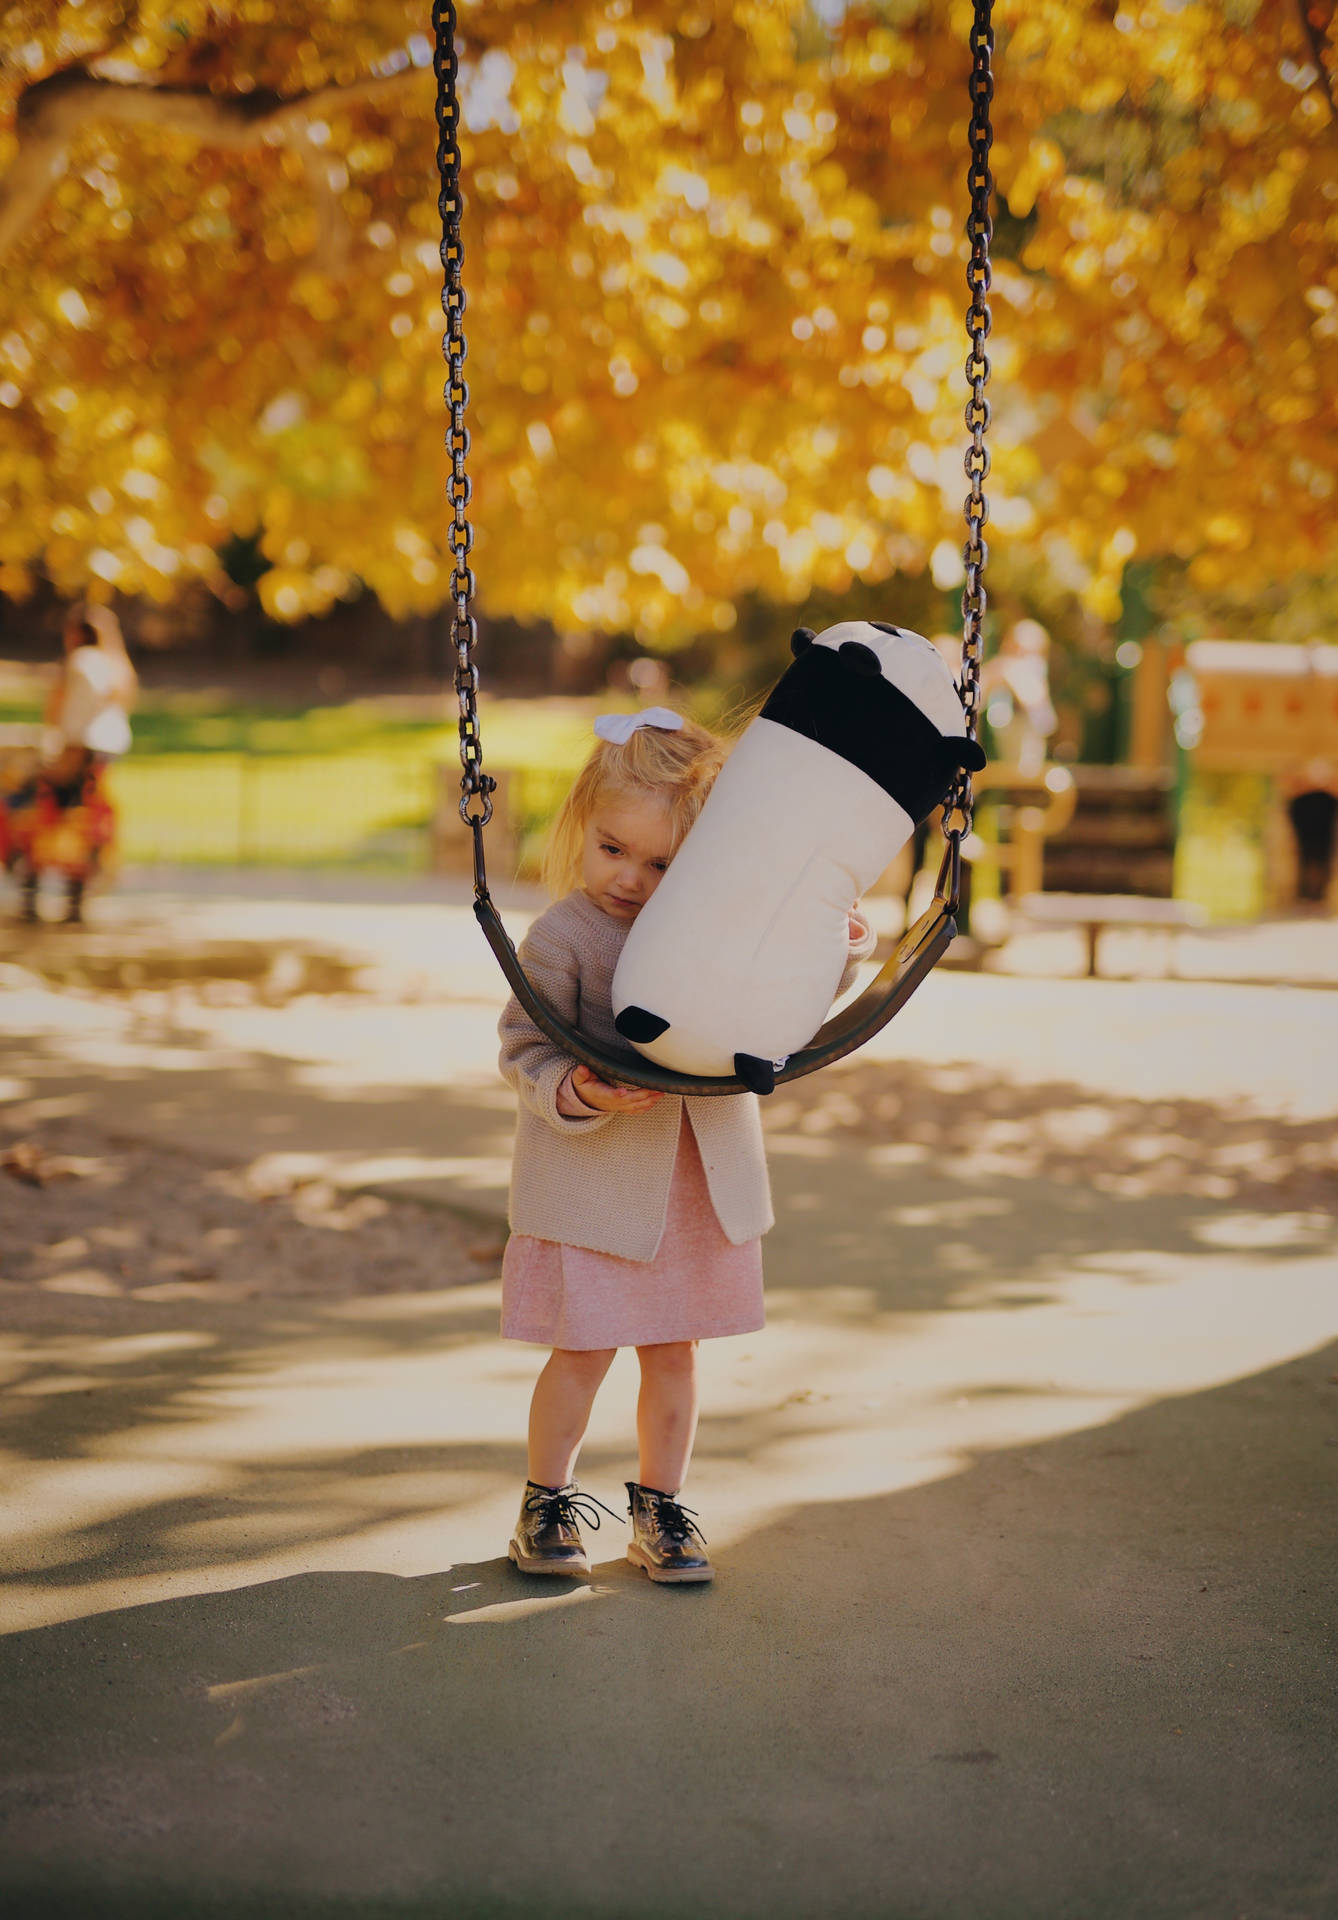 Girl Child At The Swing Wallpaper